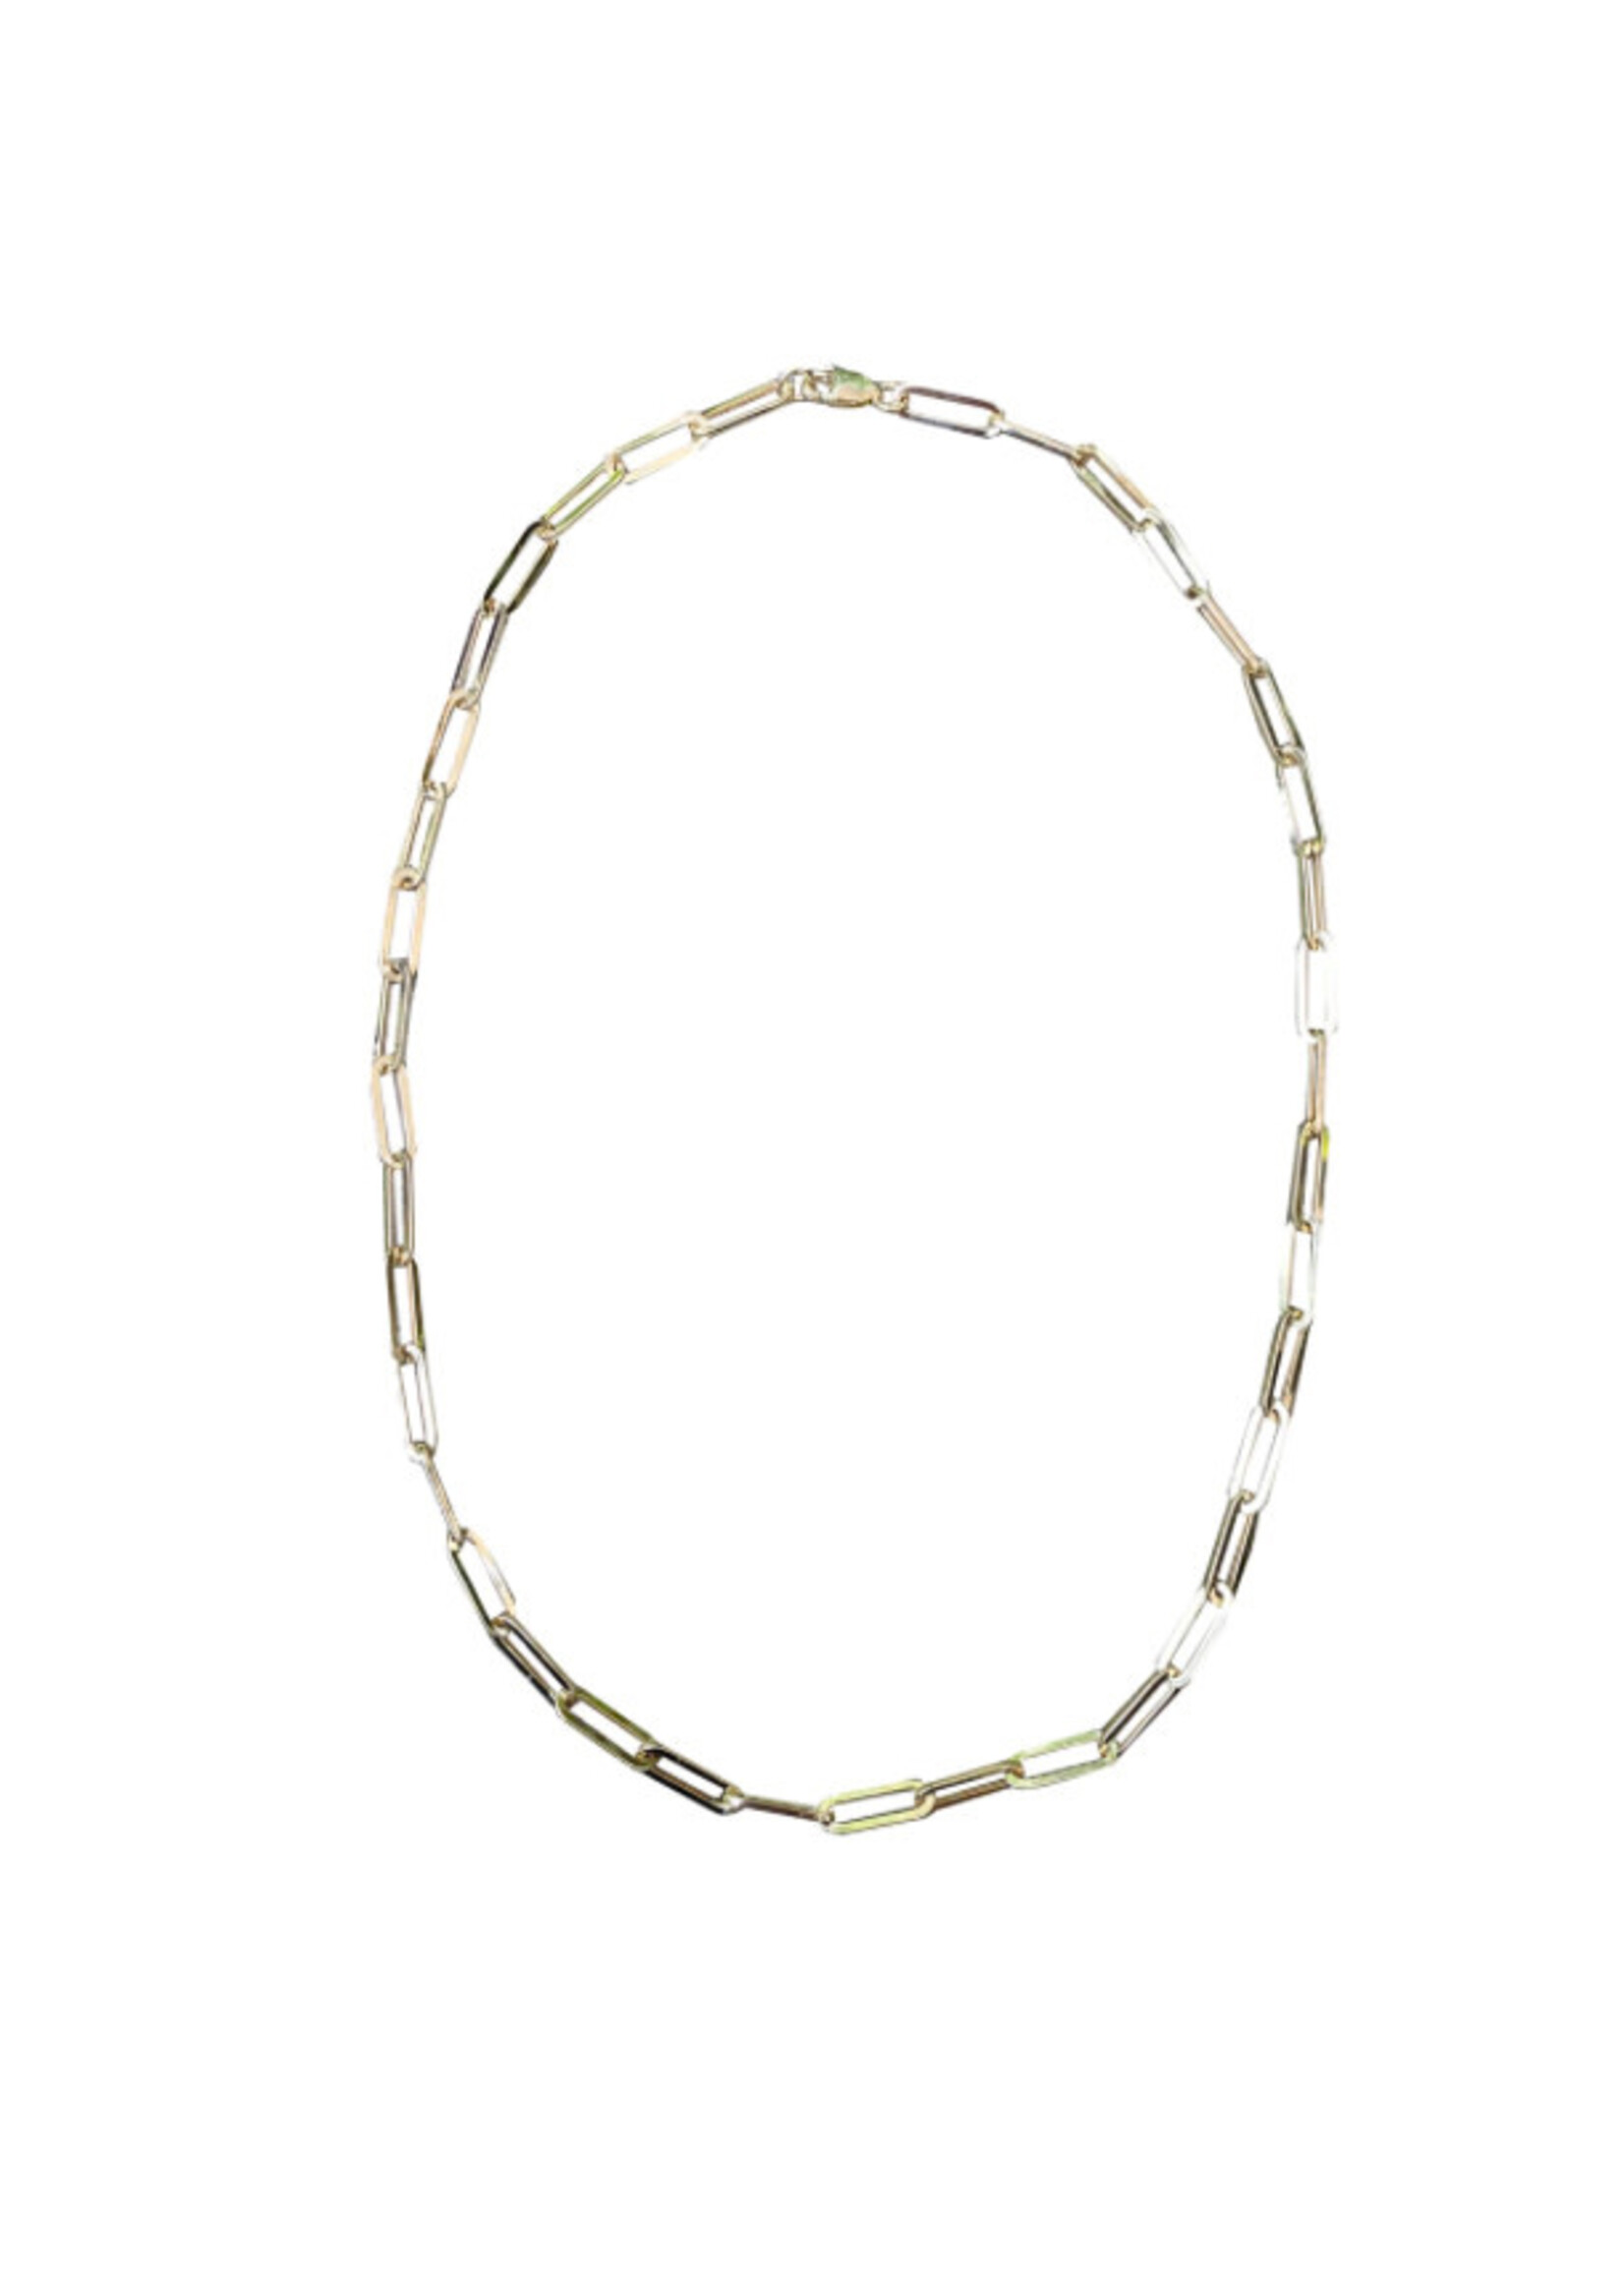 S. Carter Designs Small Paperclip Necklace